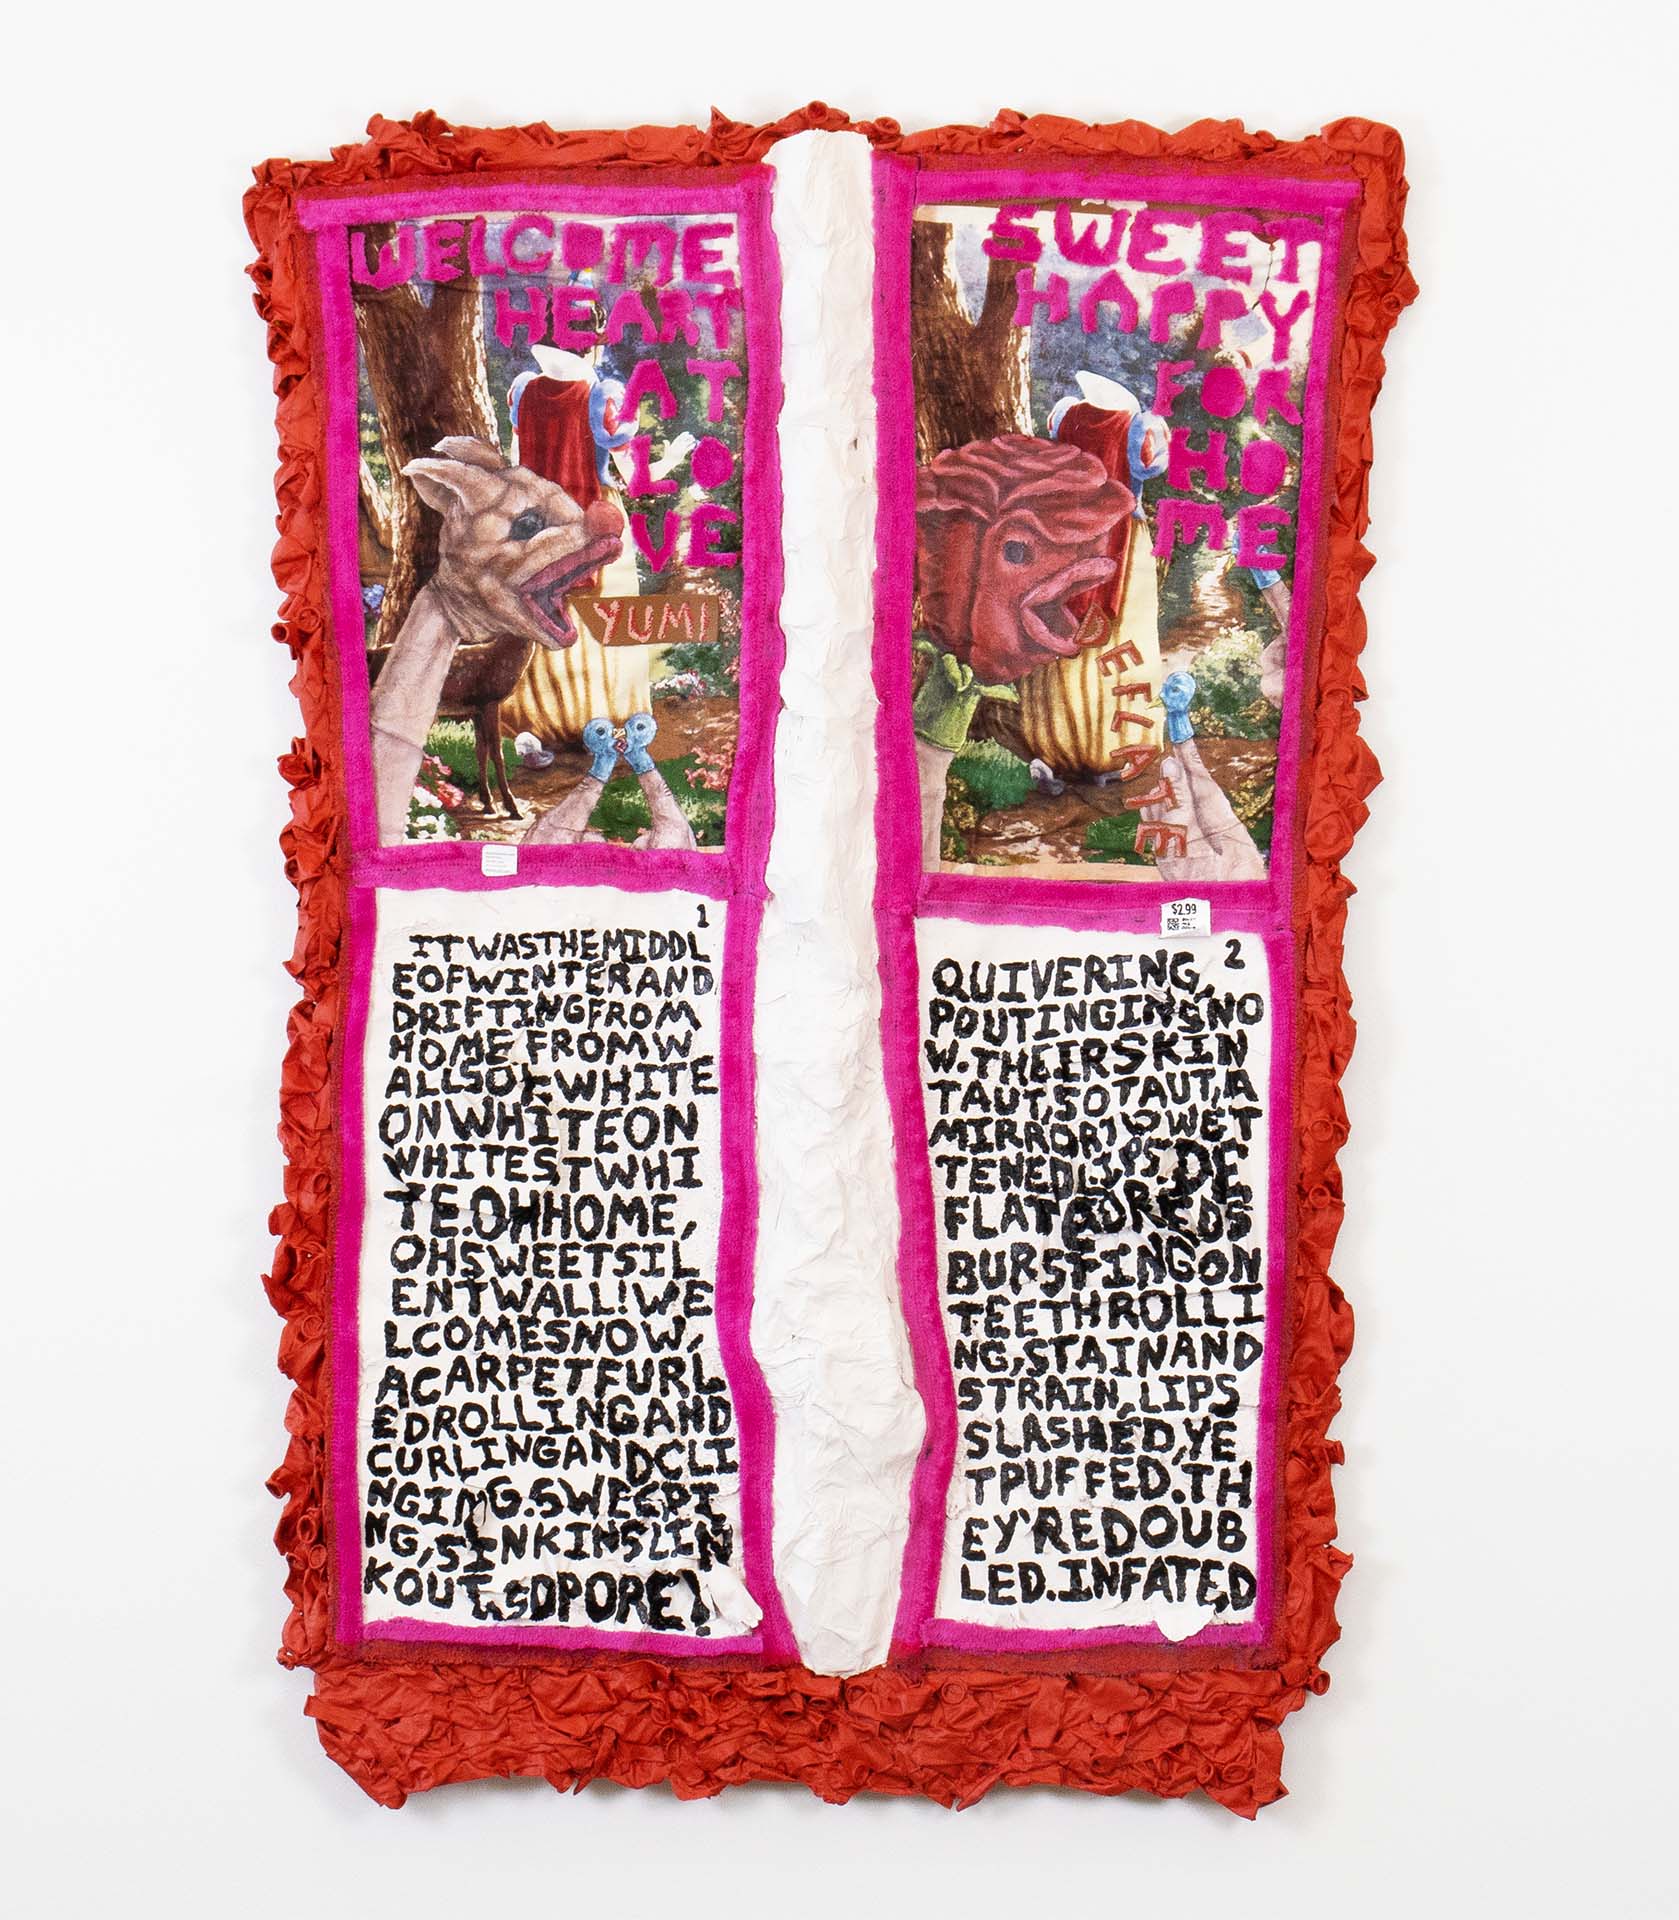 Lee Sullivan, Deflate!, Acrylic and Latex Paint, Cloth, Balloon, Wood, and Found Objects, 48“ x 31“, 2021.